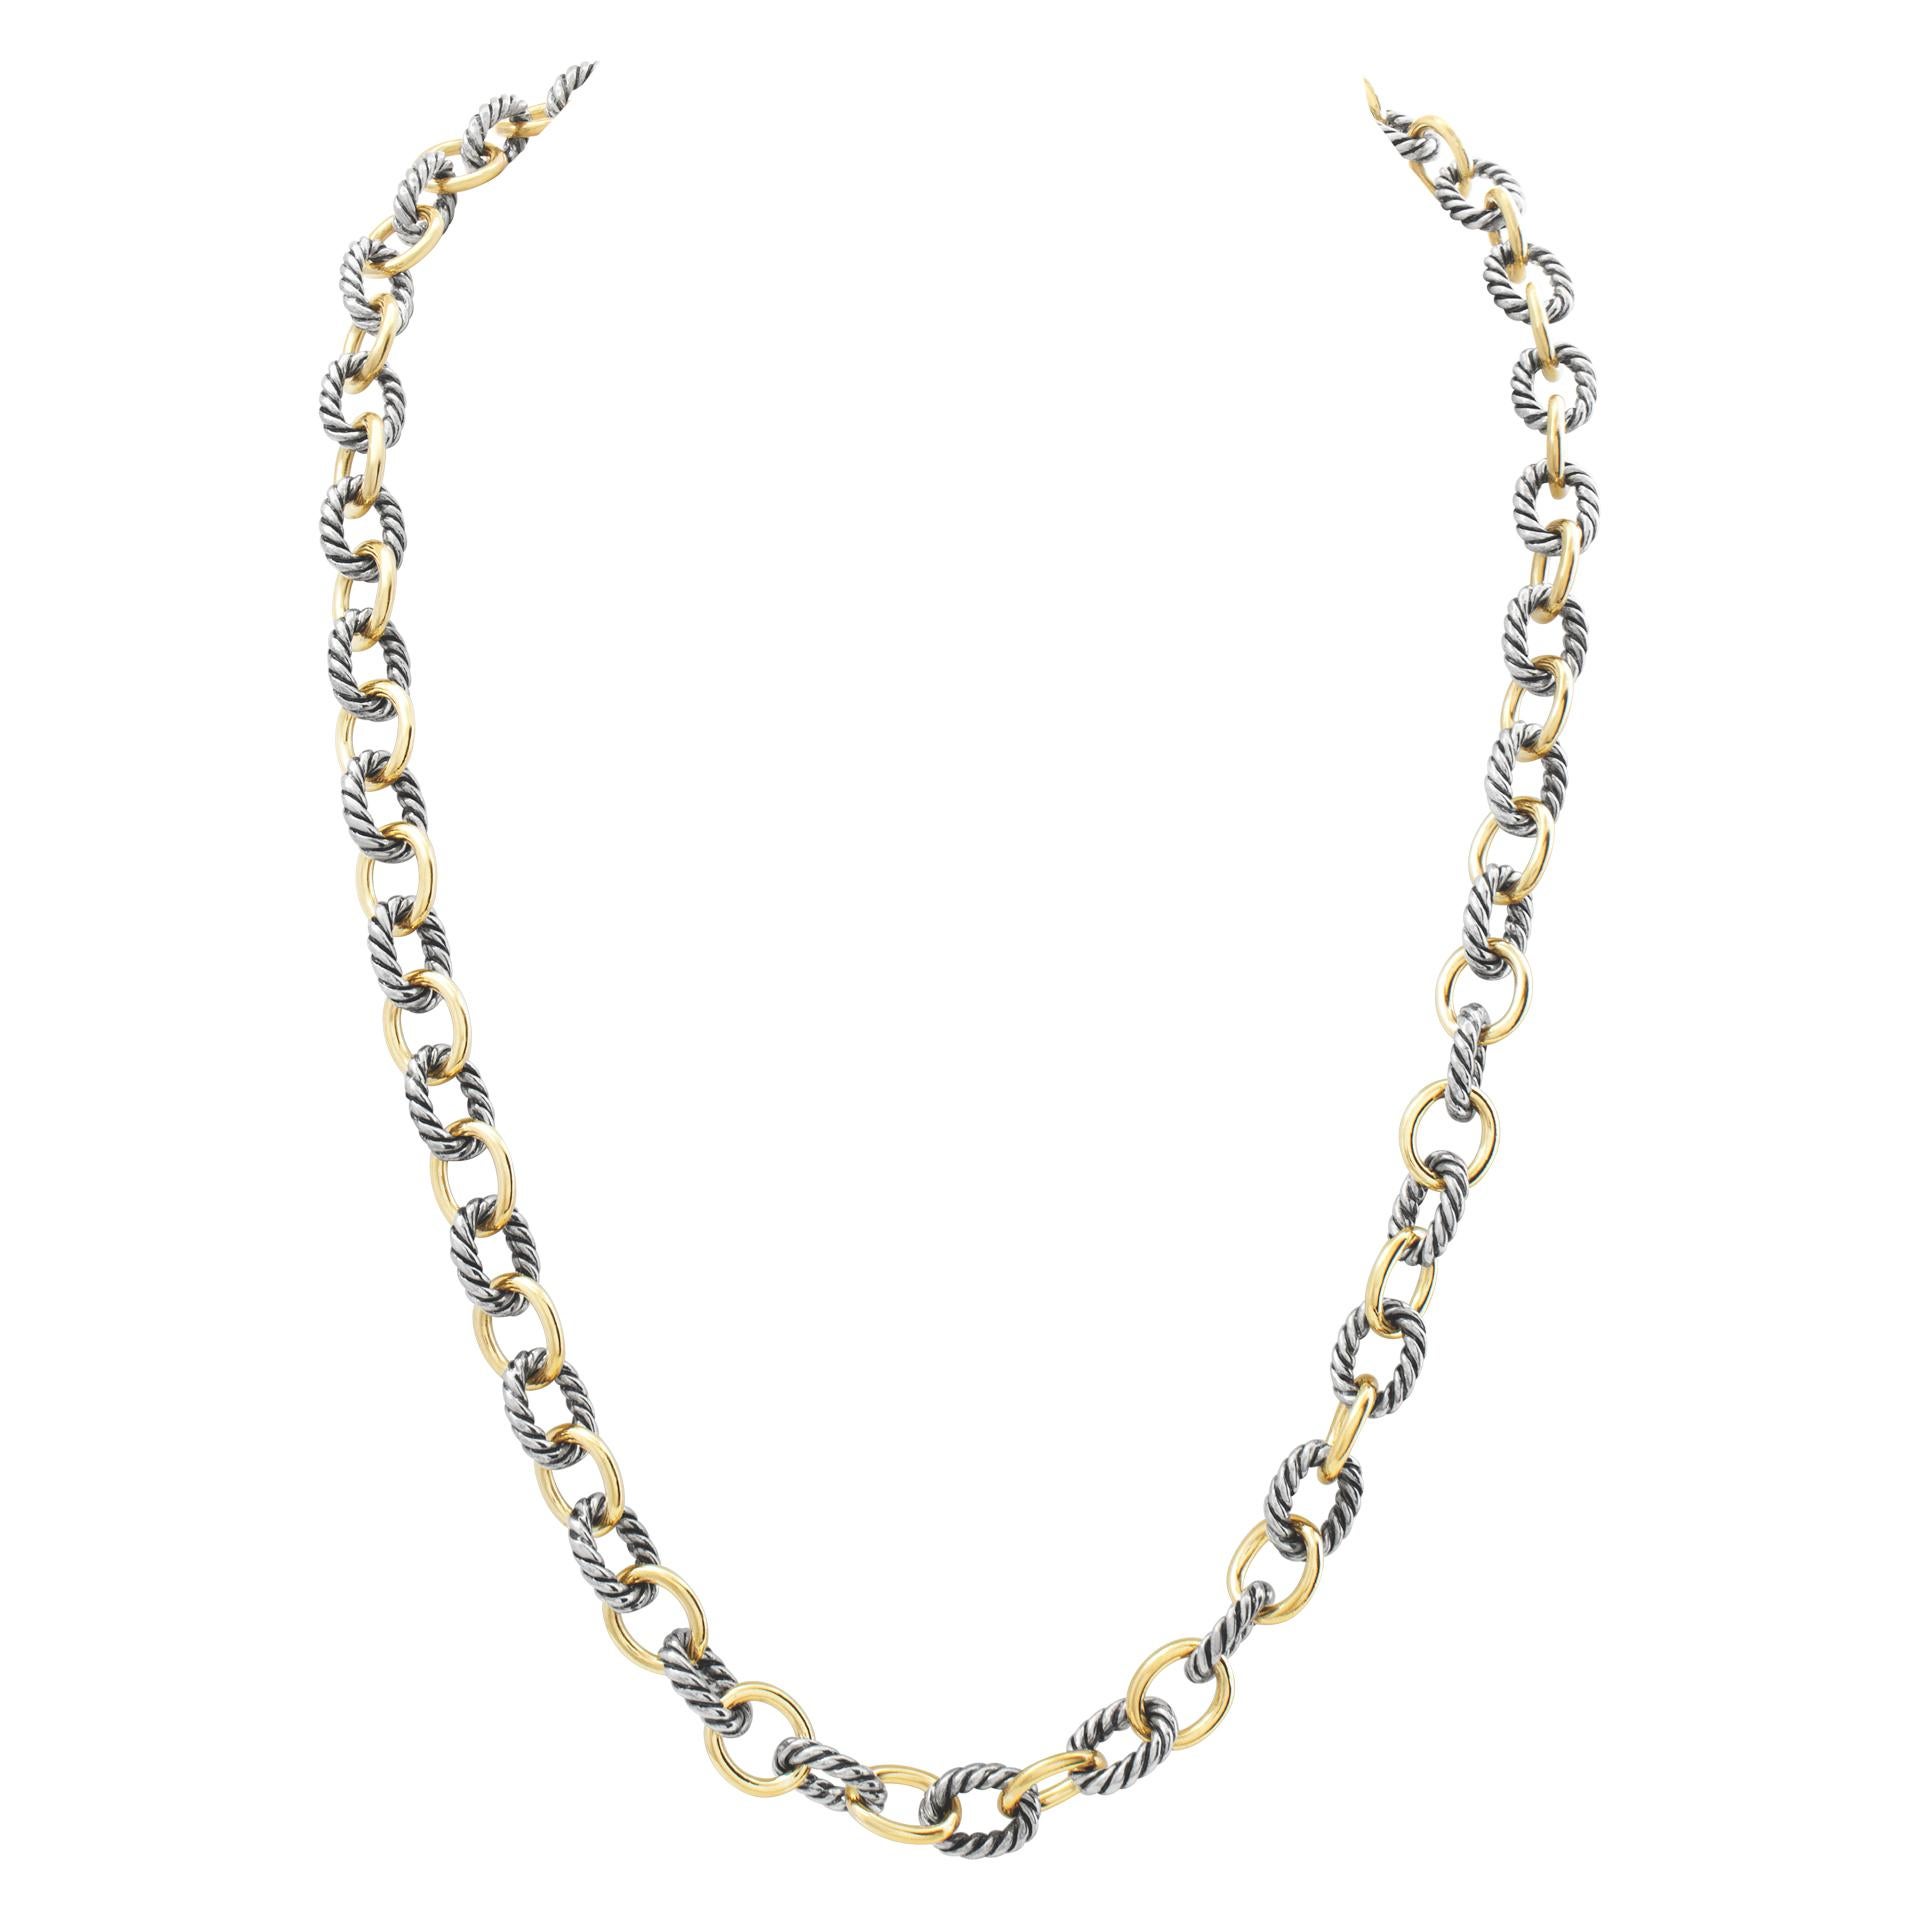 David Yurman medium link cable  chain in 18k and sterling silver necklace with toggle closure.  Length is 21